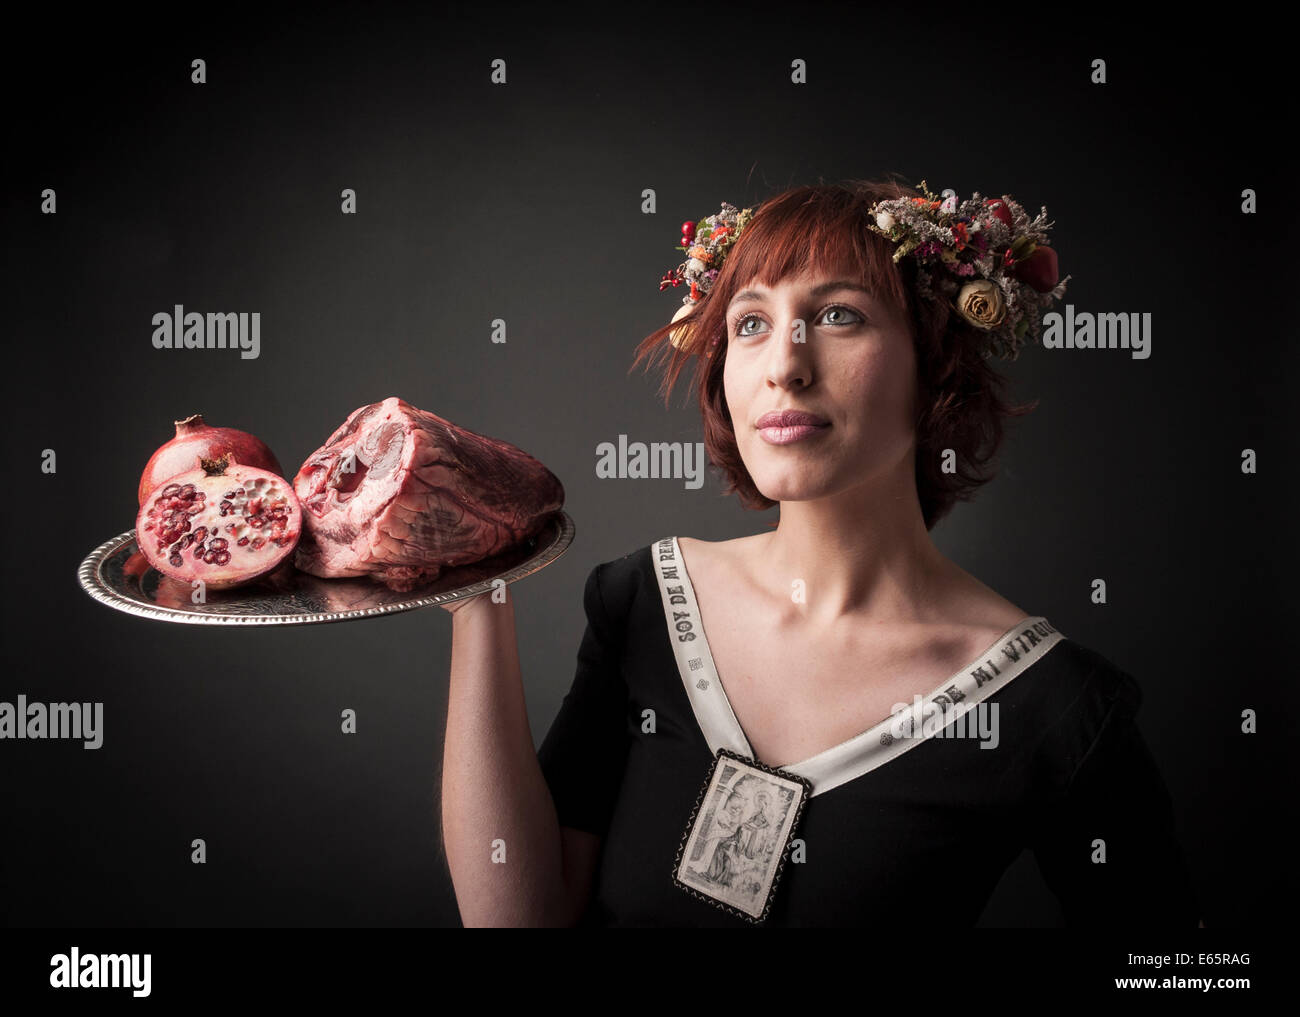 maid serving raw food Stock Photo